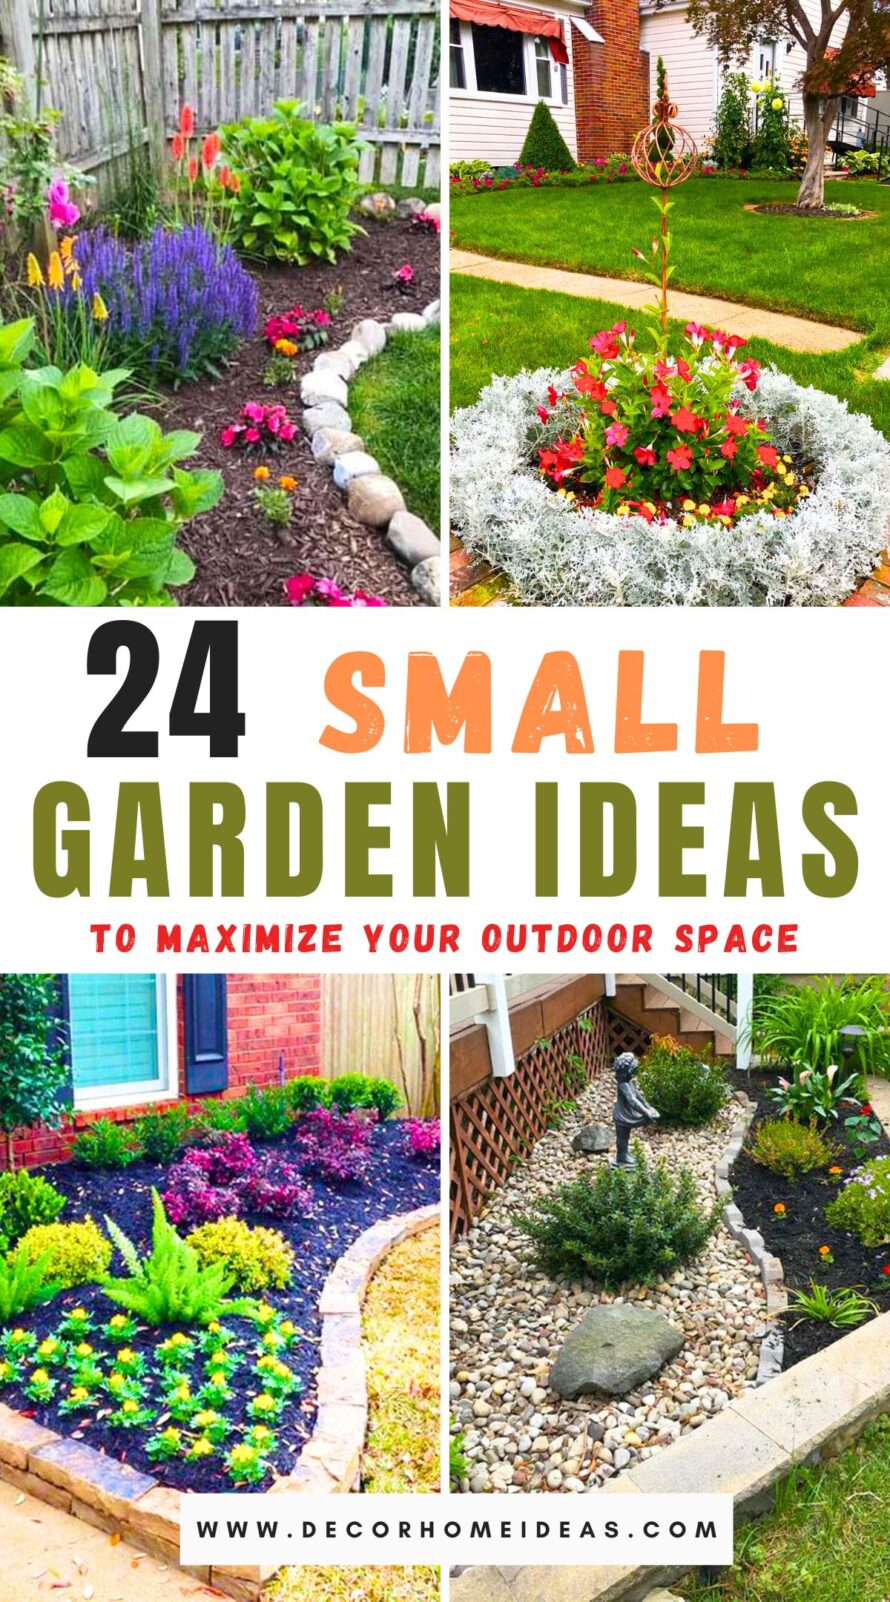 Discover 24 stunning small garden ideas to enhance your curb appeal. From vertical gardens and cozy seating areas to charming container gardens and colorful flower beds, these designs make the most of limited outdoor spaces. Whether you have a tiny backyard, a narrow strip of land, or a compact balcony, these creative ideas will help you create a beautiful and inviting garden that delights the senses and impresses visitors.